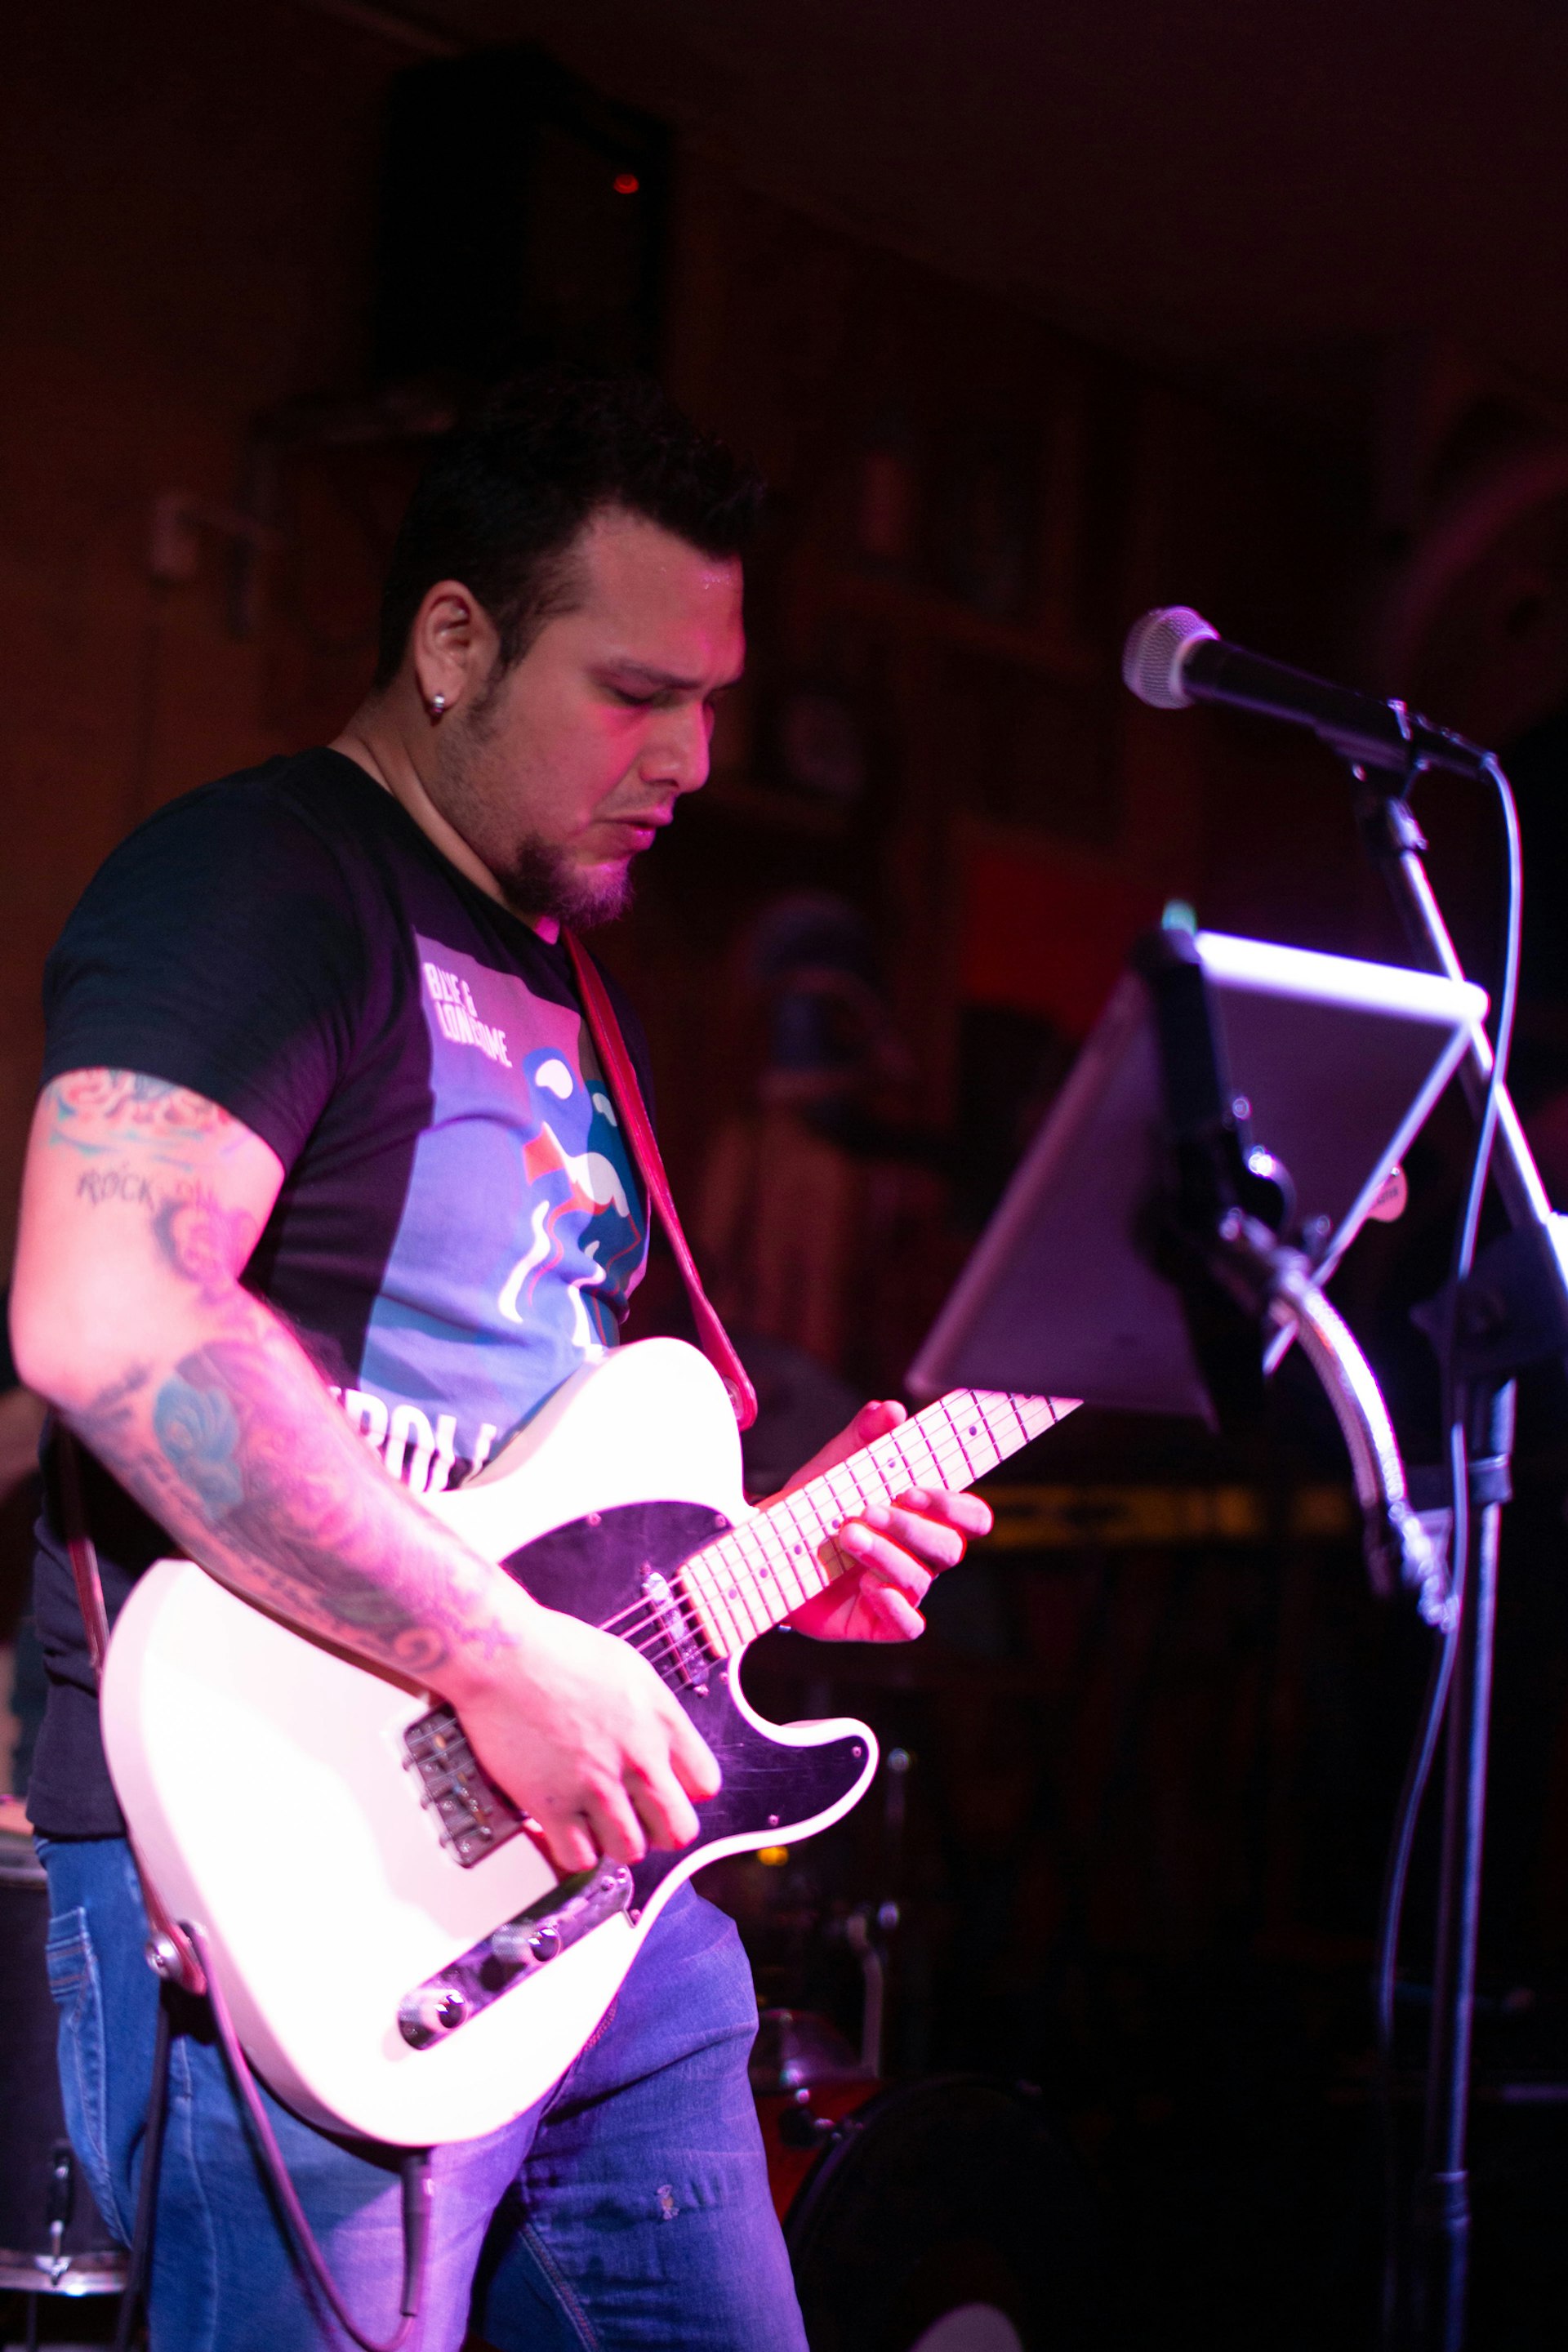 A man in a t-shirt plays the guitar with a microphone in front of him